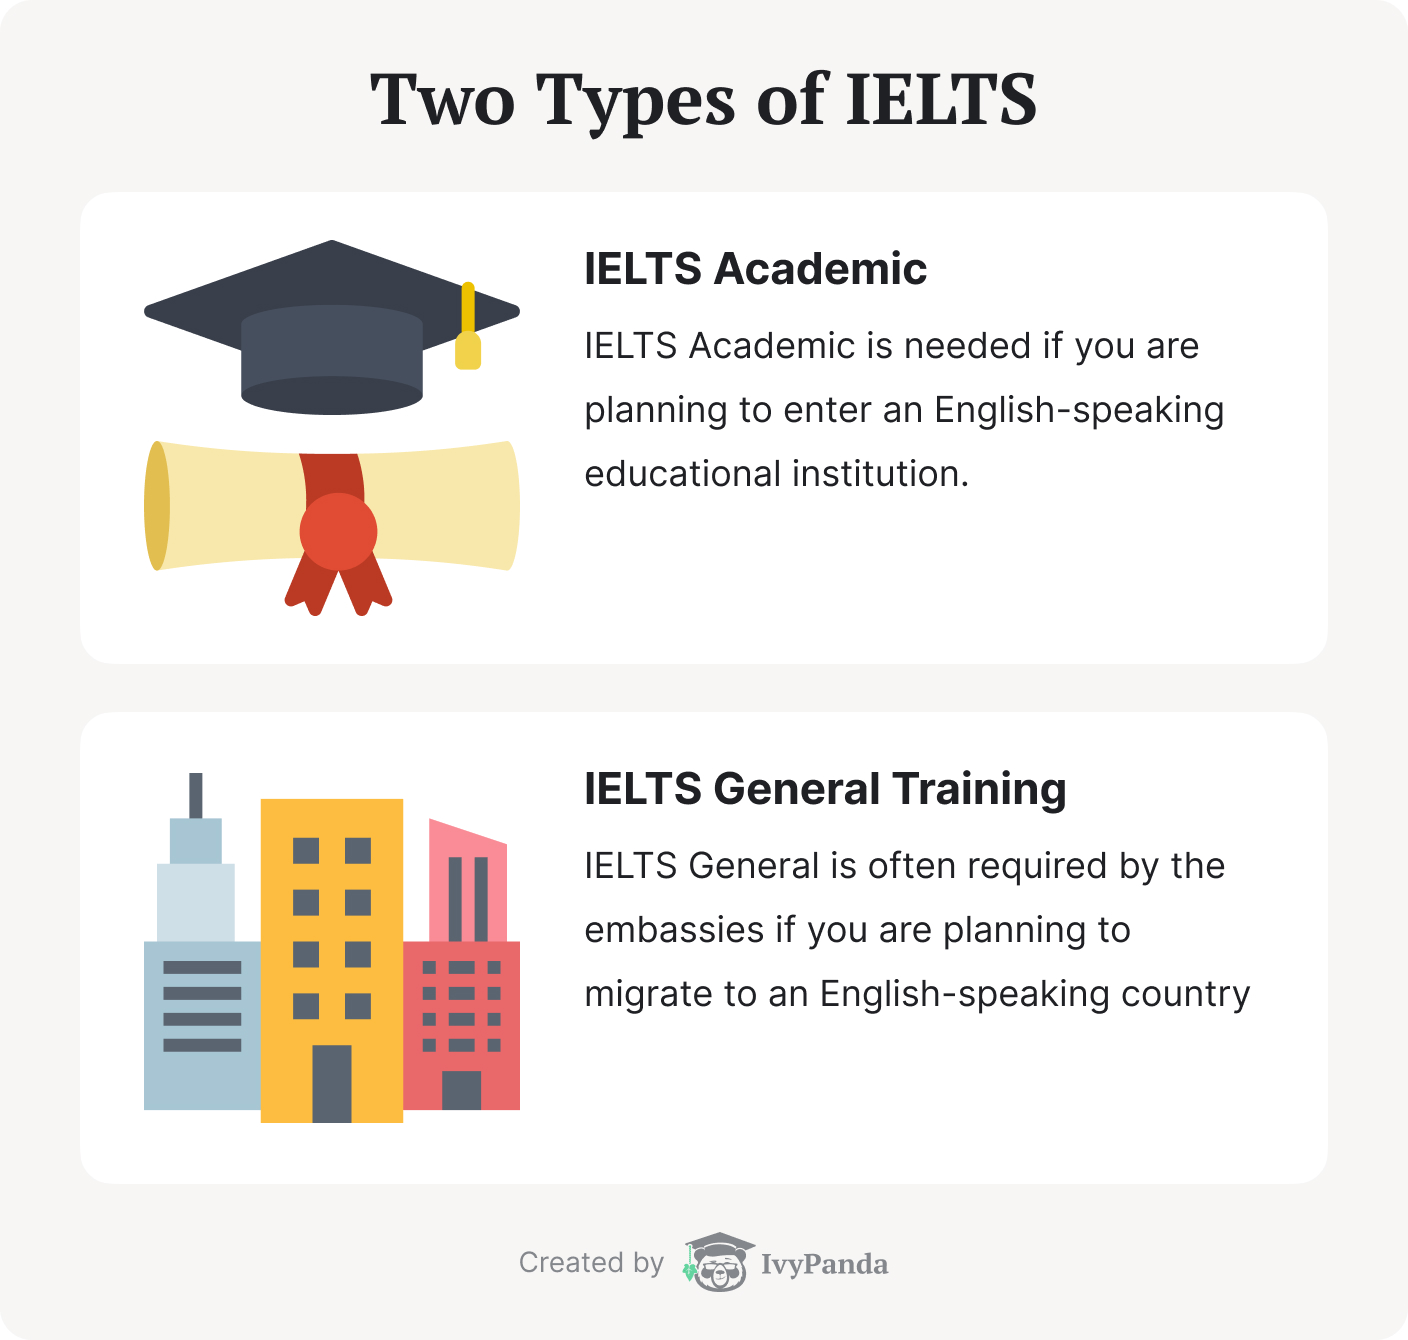 Two types of IELTS: IELTS Academic and IELTS General Training.